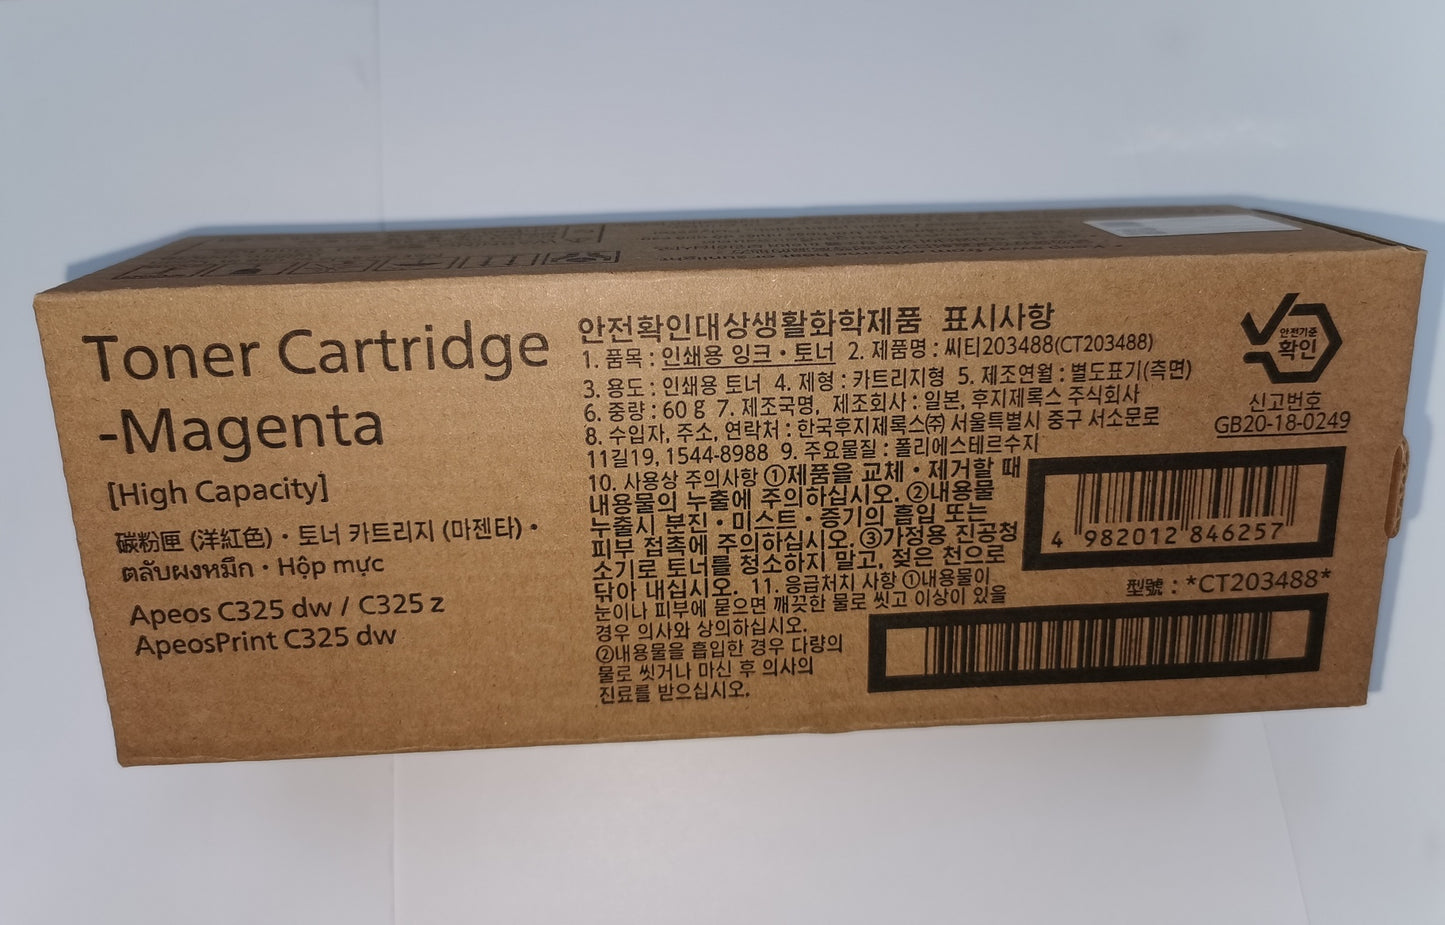 CT203486, CT203487, CT203488 and CT203489 Original Fujifilm Toner Cartridge for Apeos C325z/325dw. Order all 4 colors and get a FREE CWAA0980 worth $40.